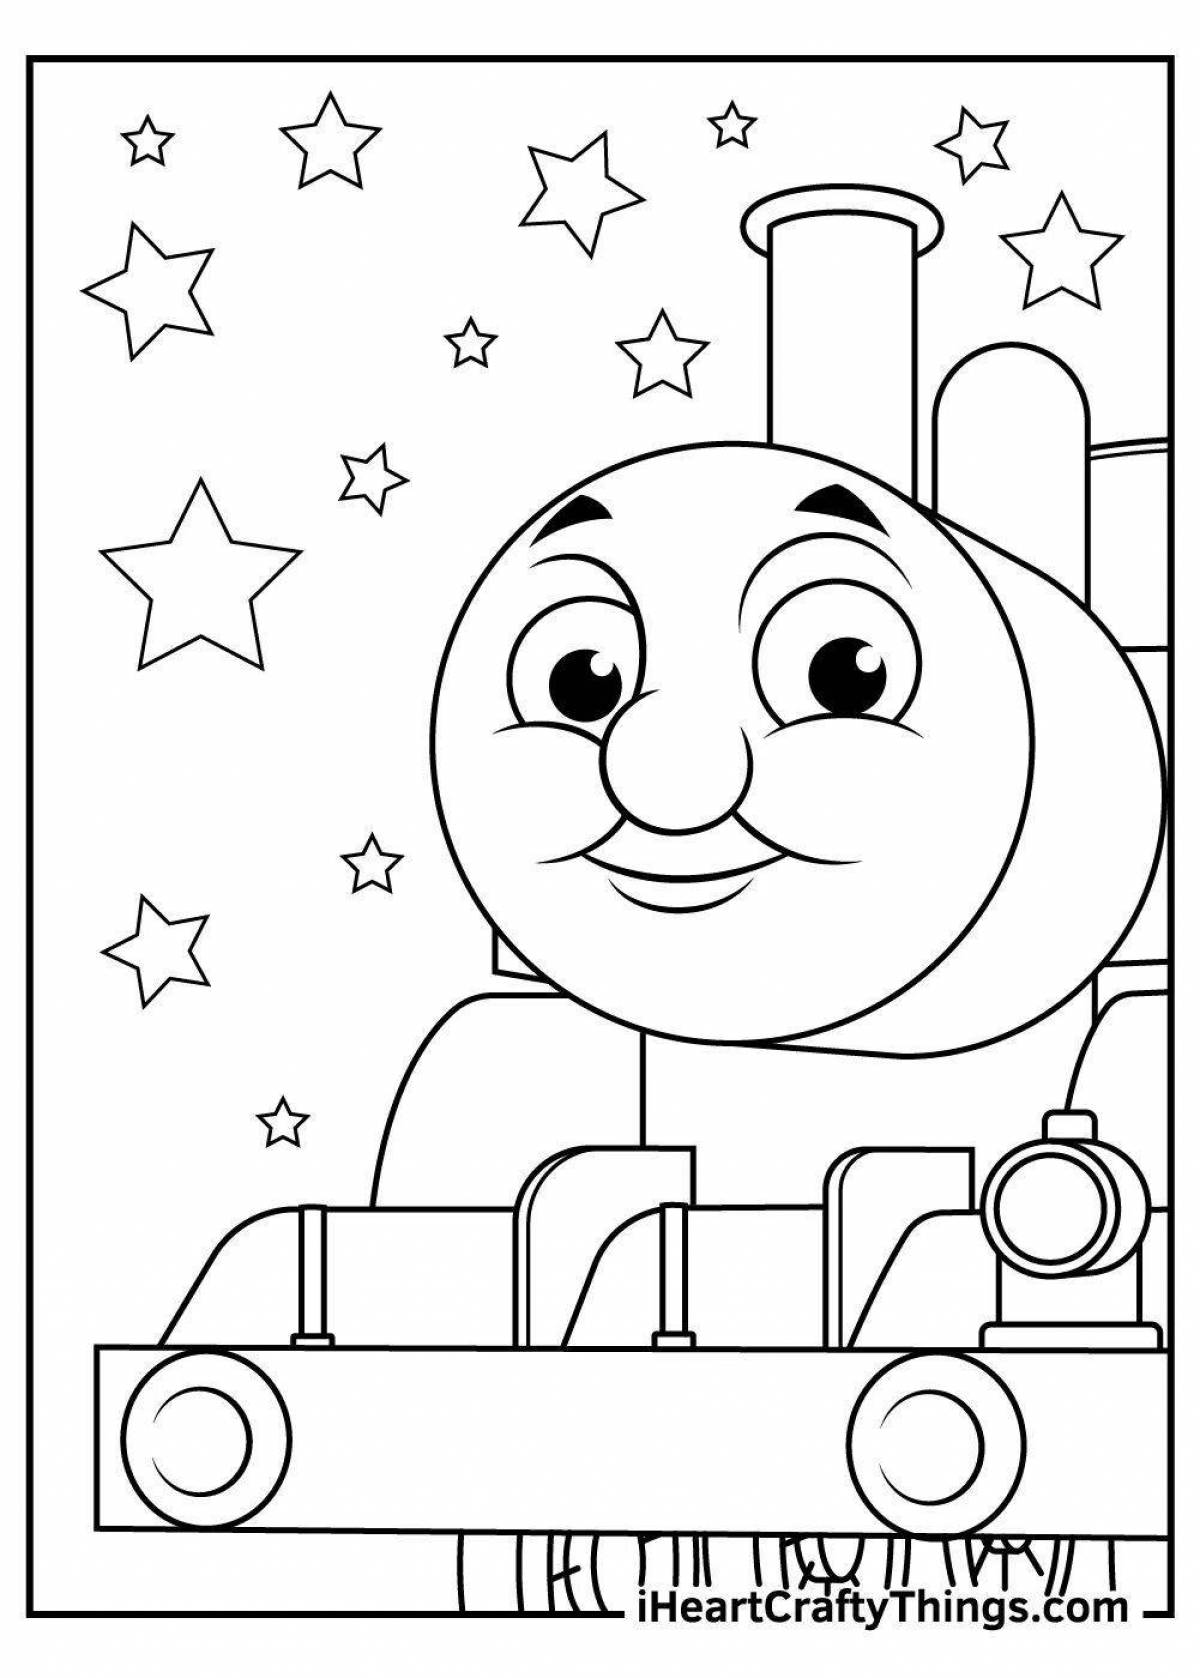 Playful spider train coloring page